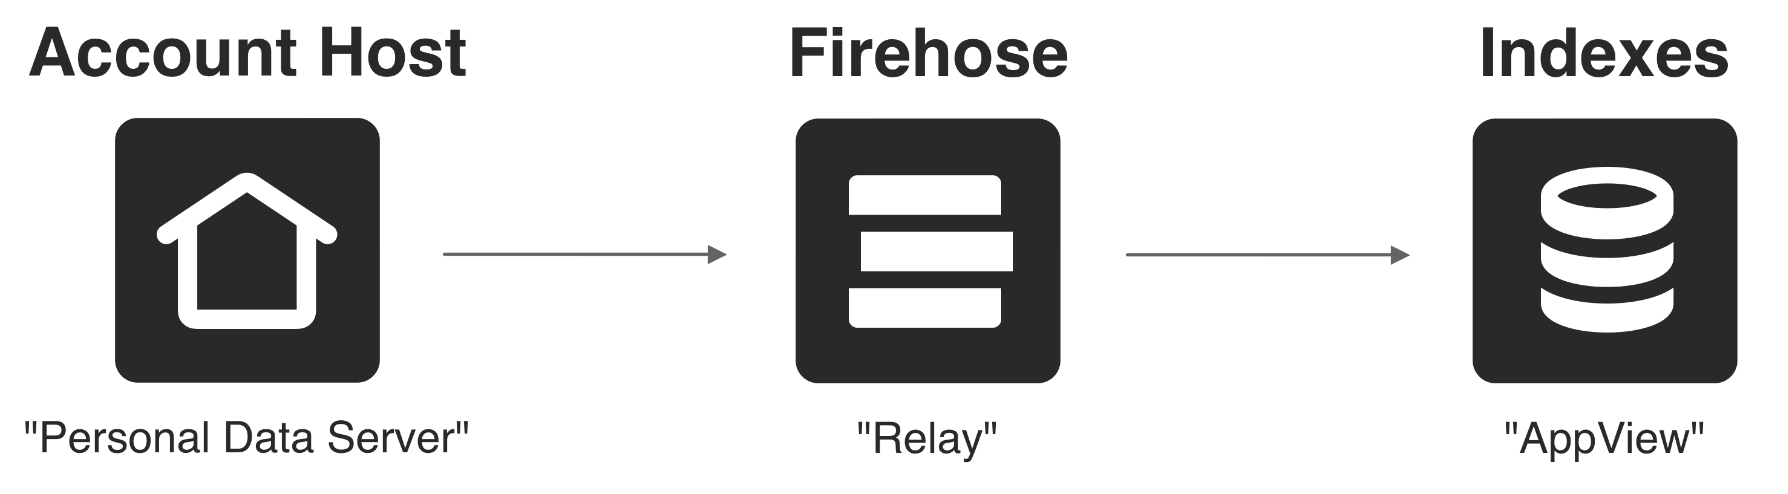 Data flows from independent account hosts into a firehose and then to applications.